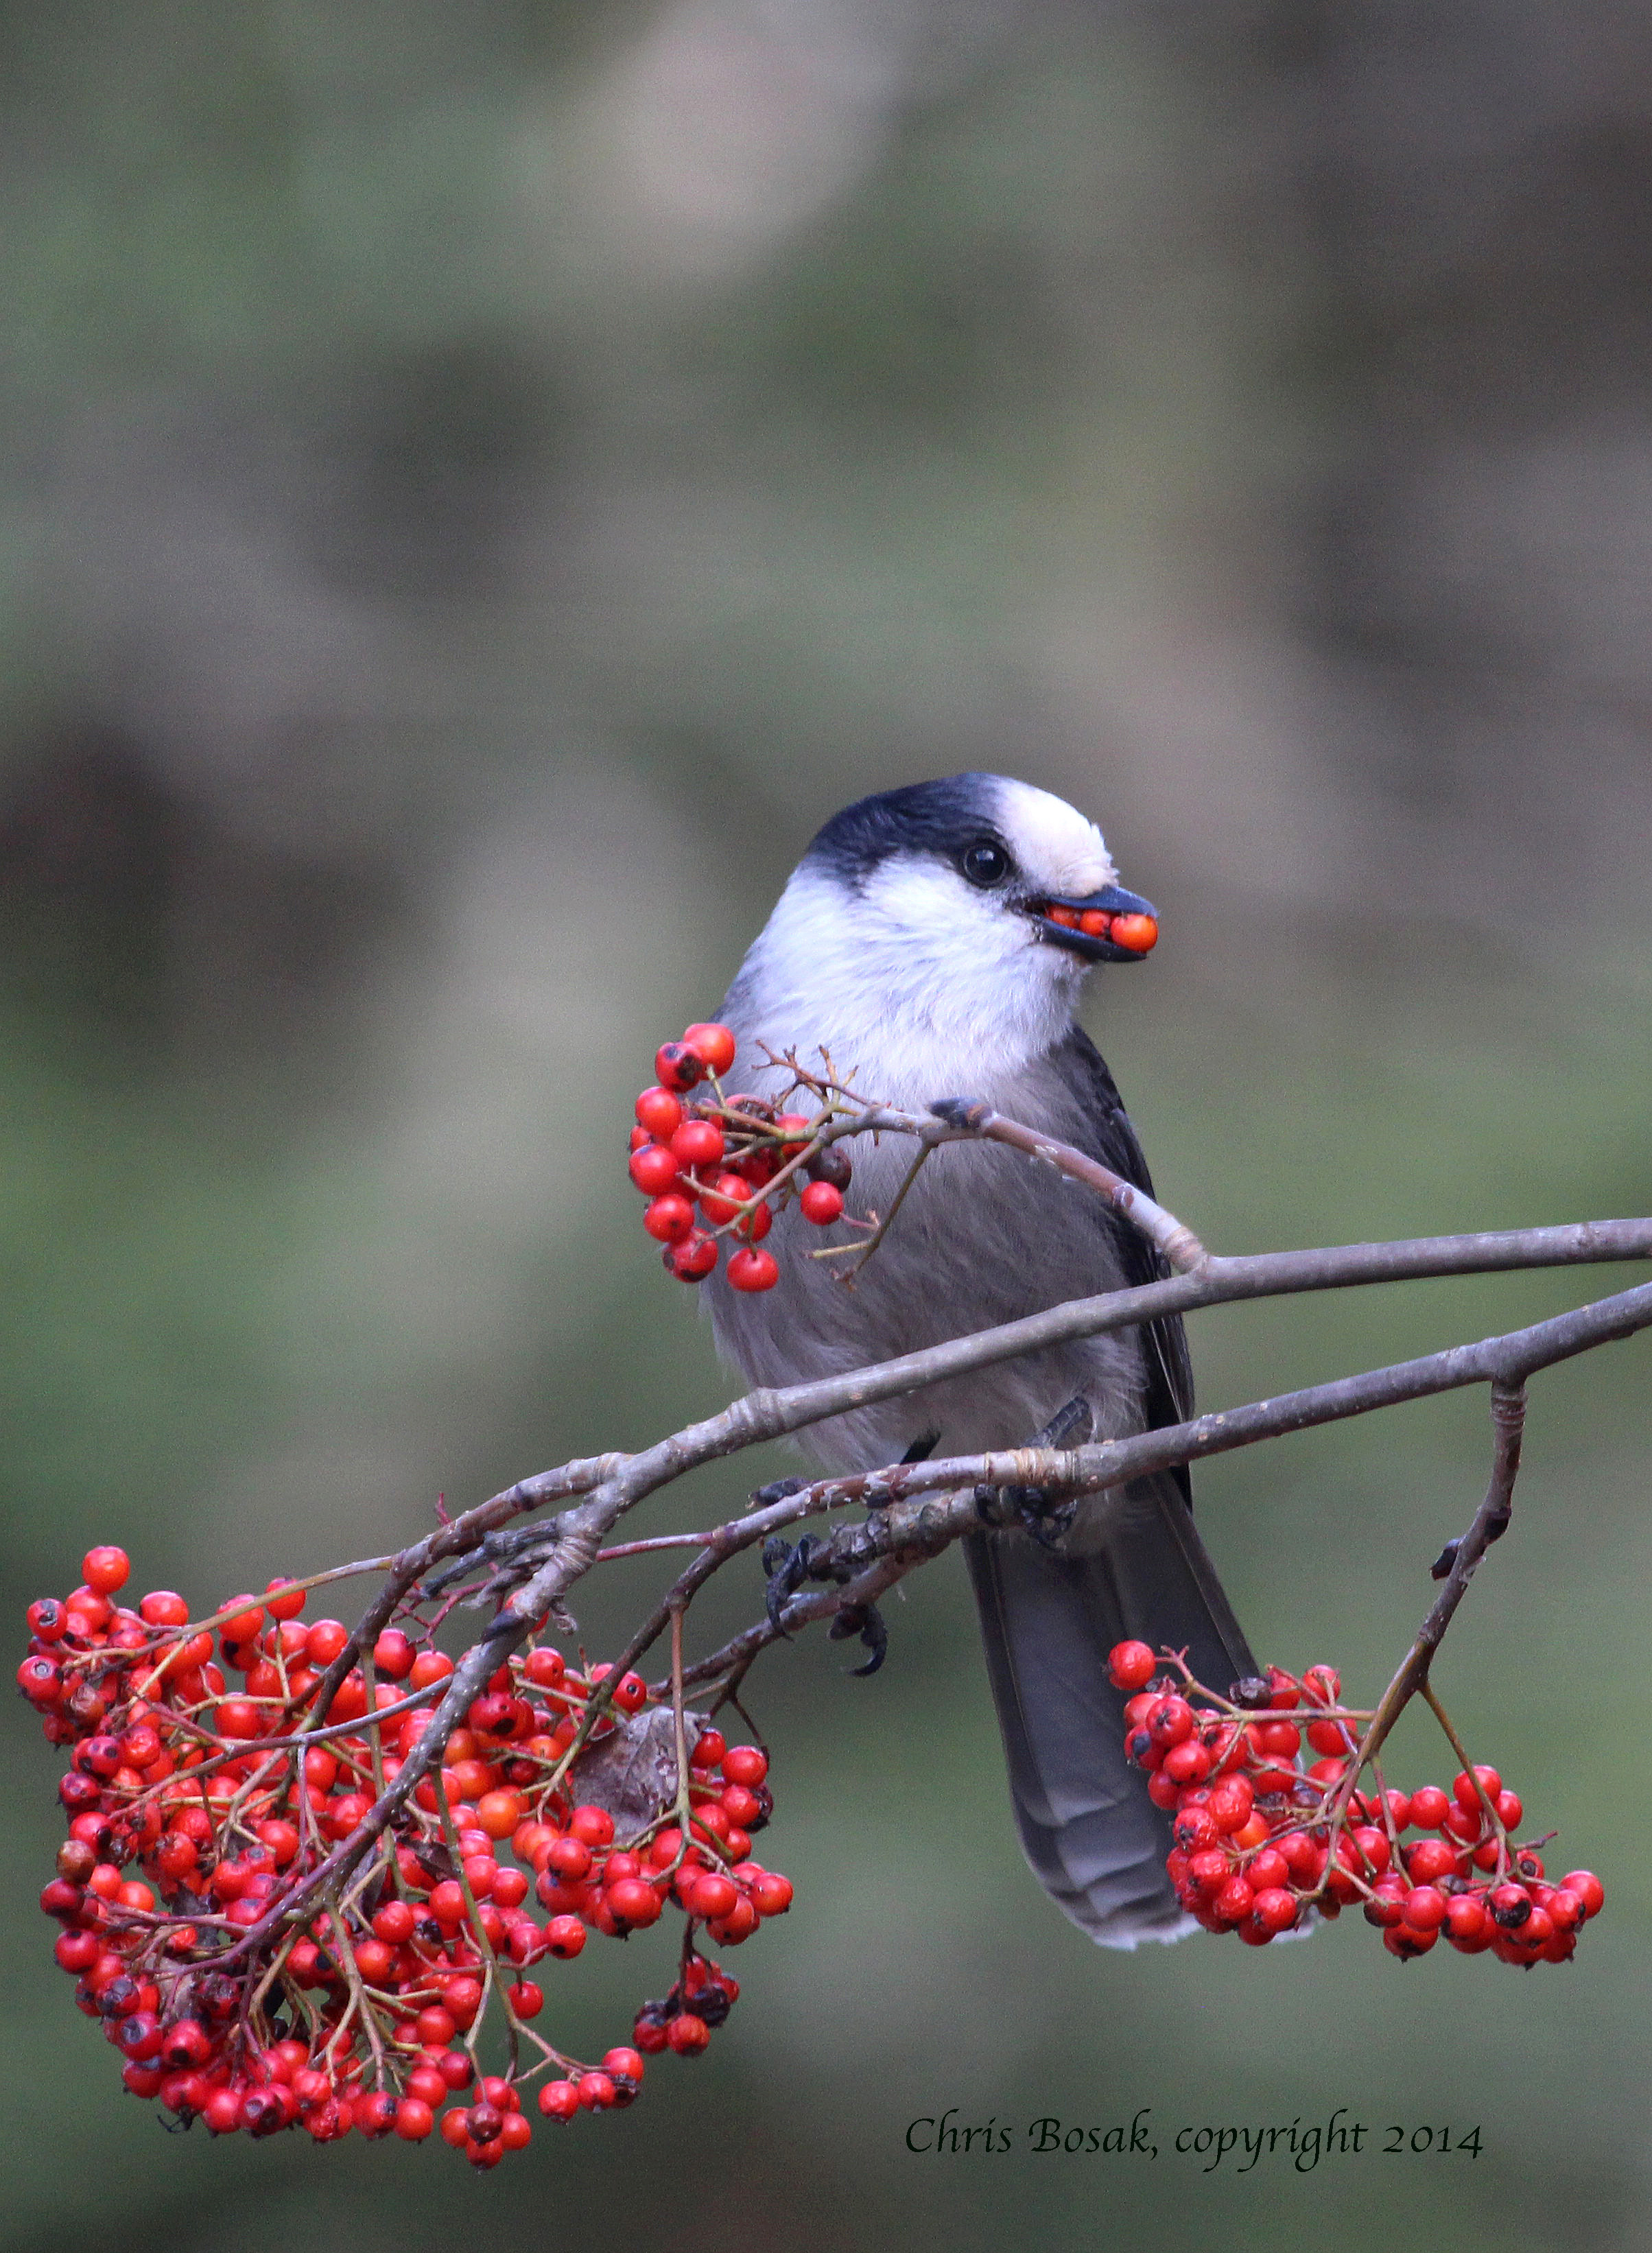 Photo by Chris Bosak Gray Jay with berries, northern New Hampshire, fall 2013.